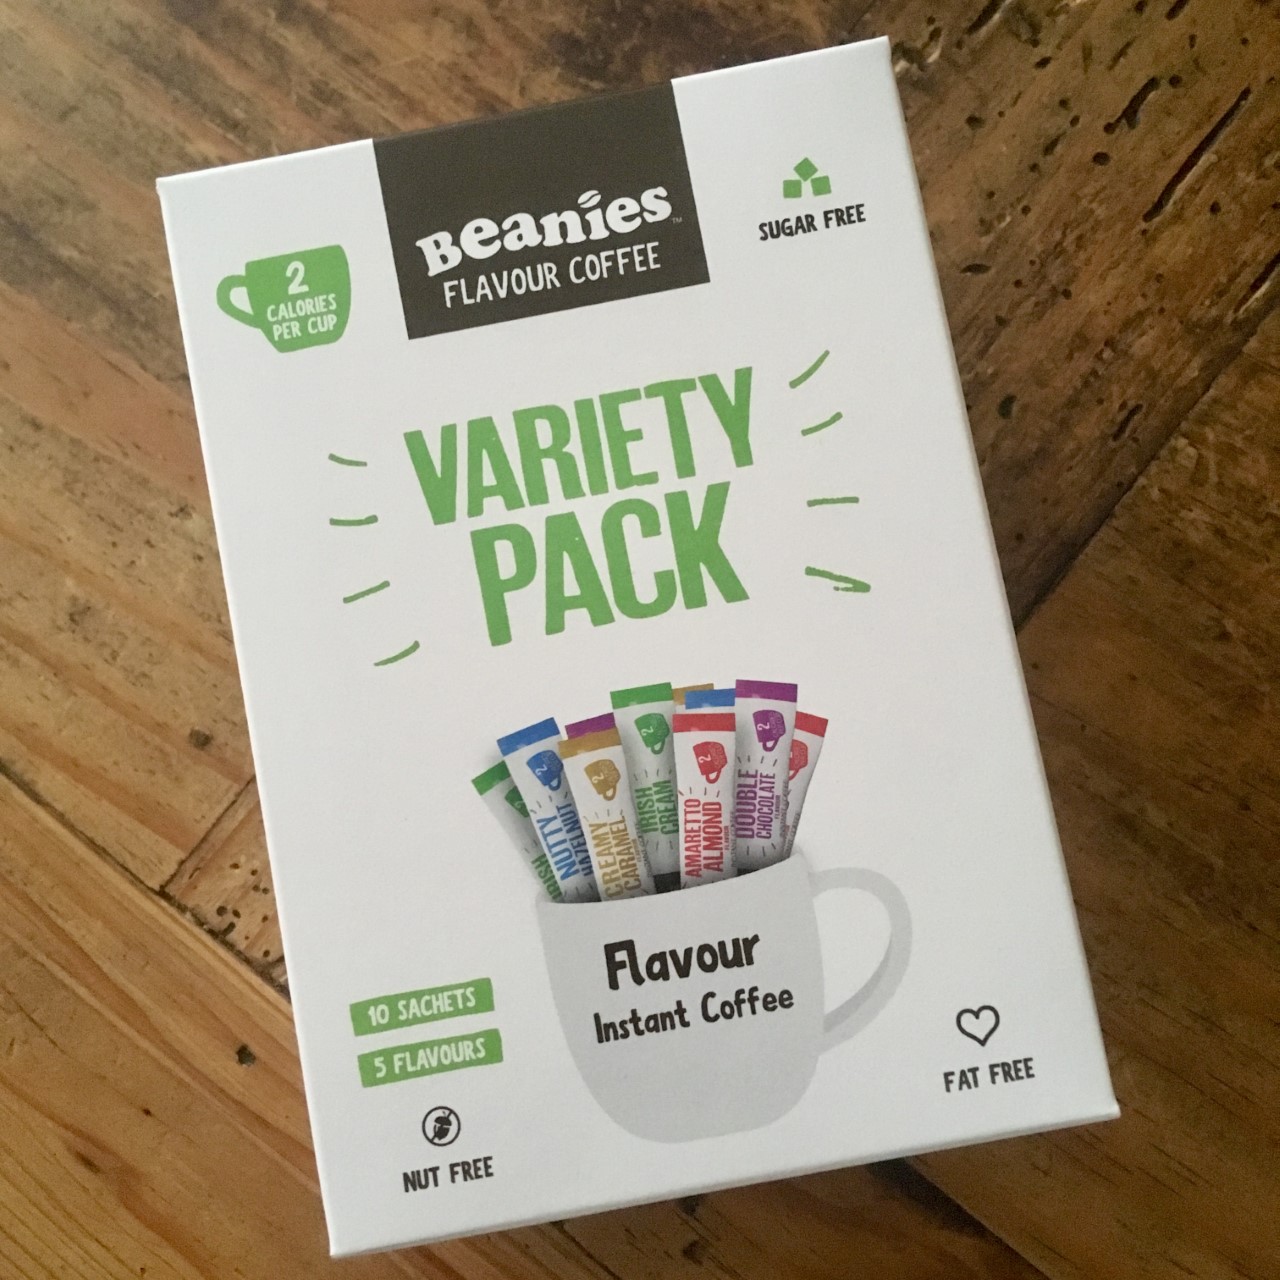 a white box of beanies coffee. The pack has a cup on it showing sachets coming out of it